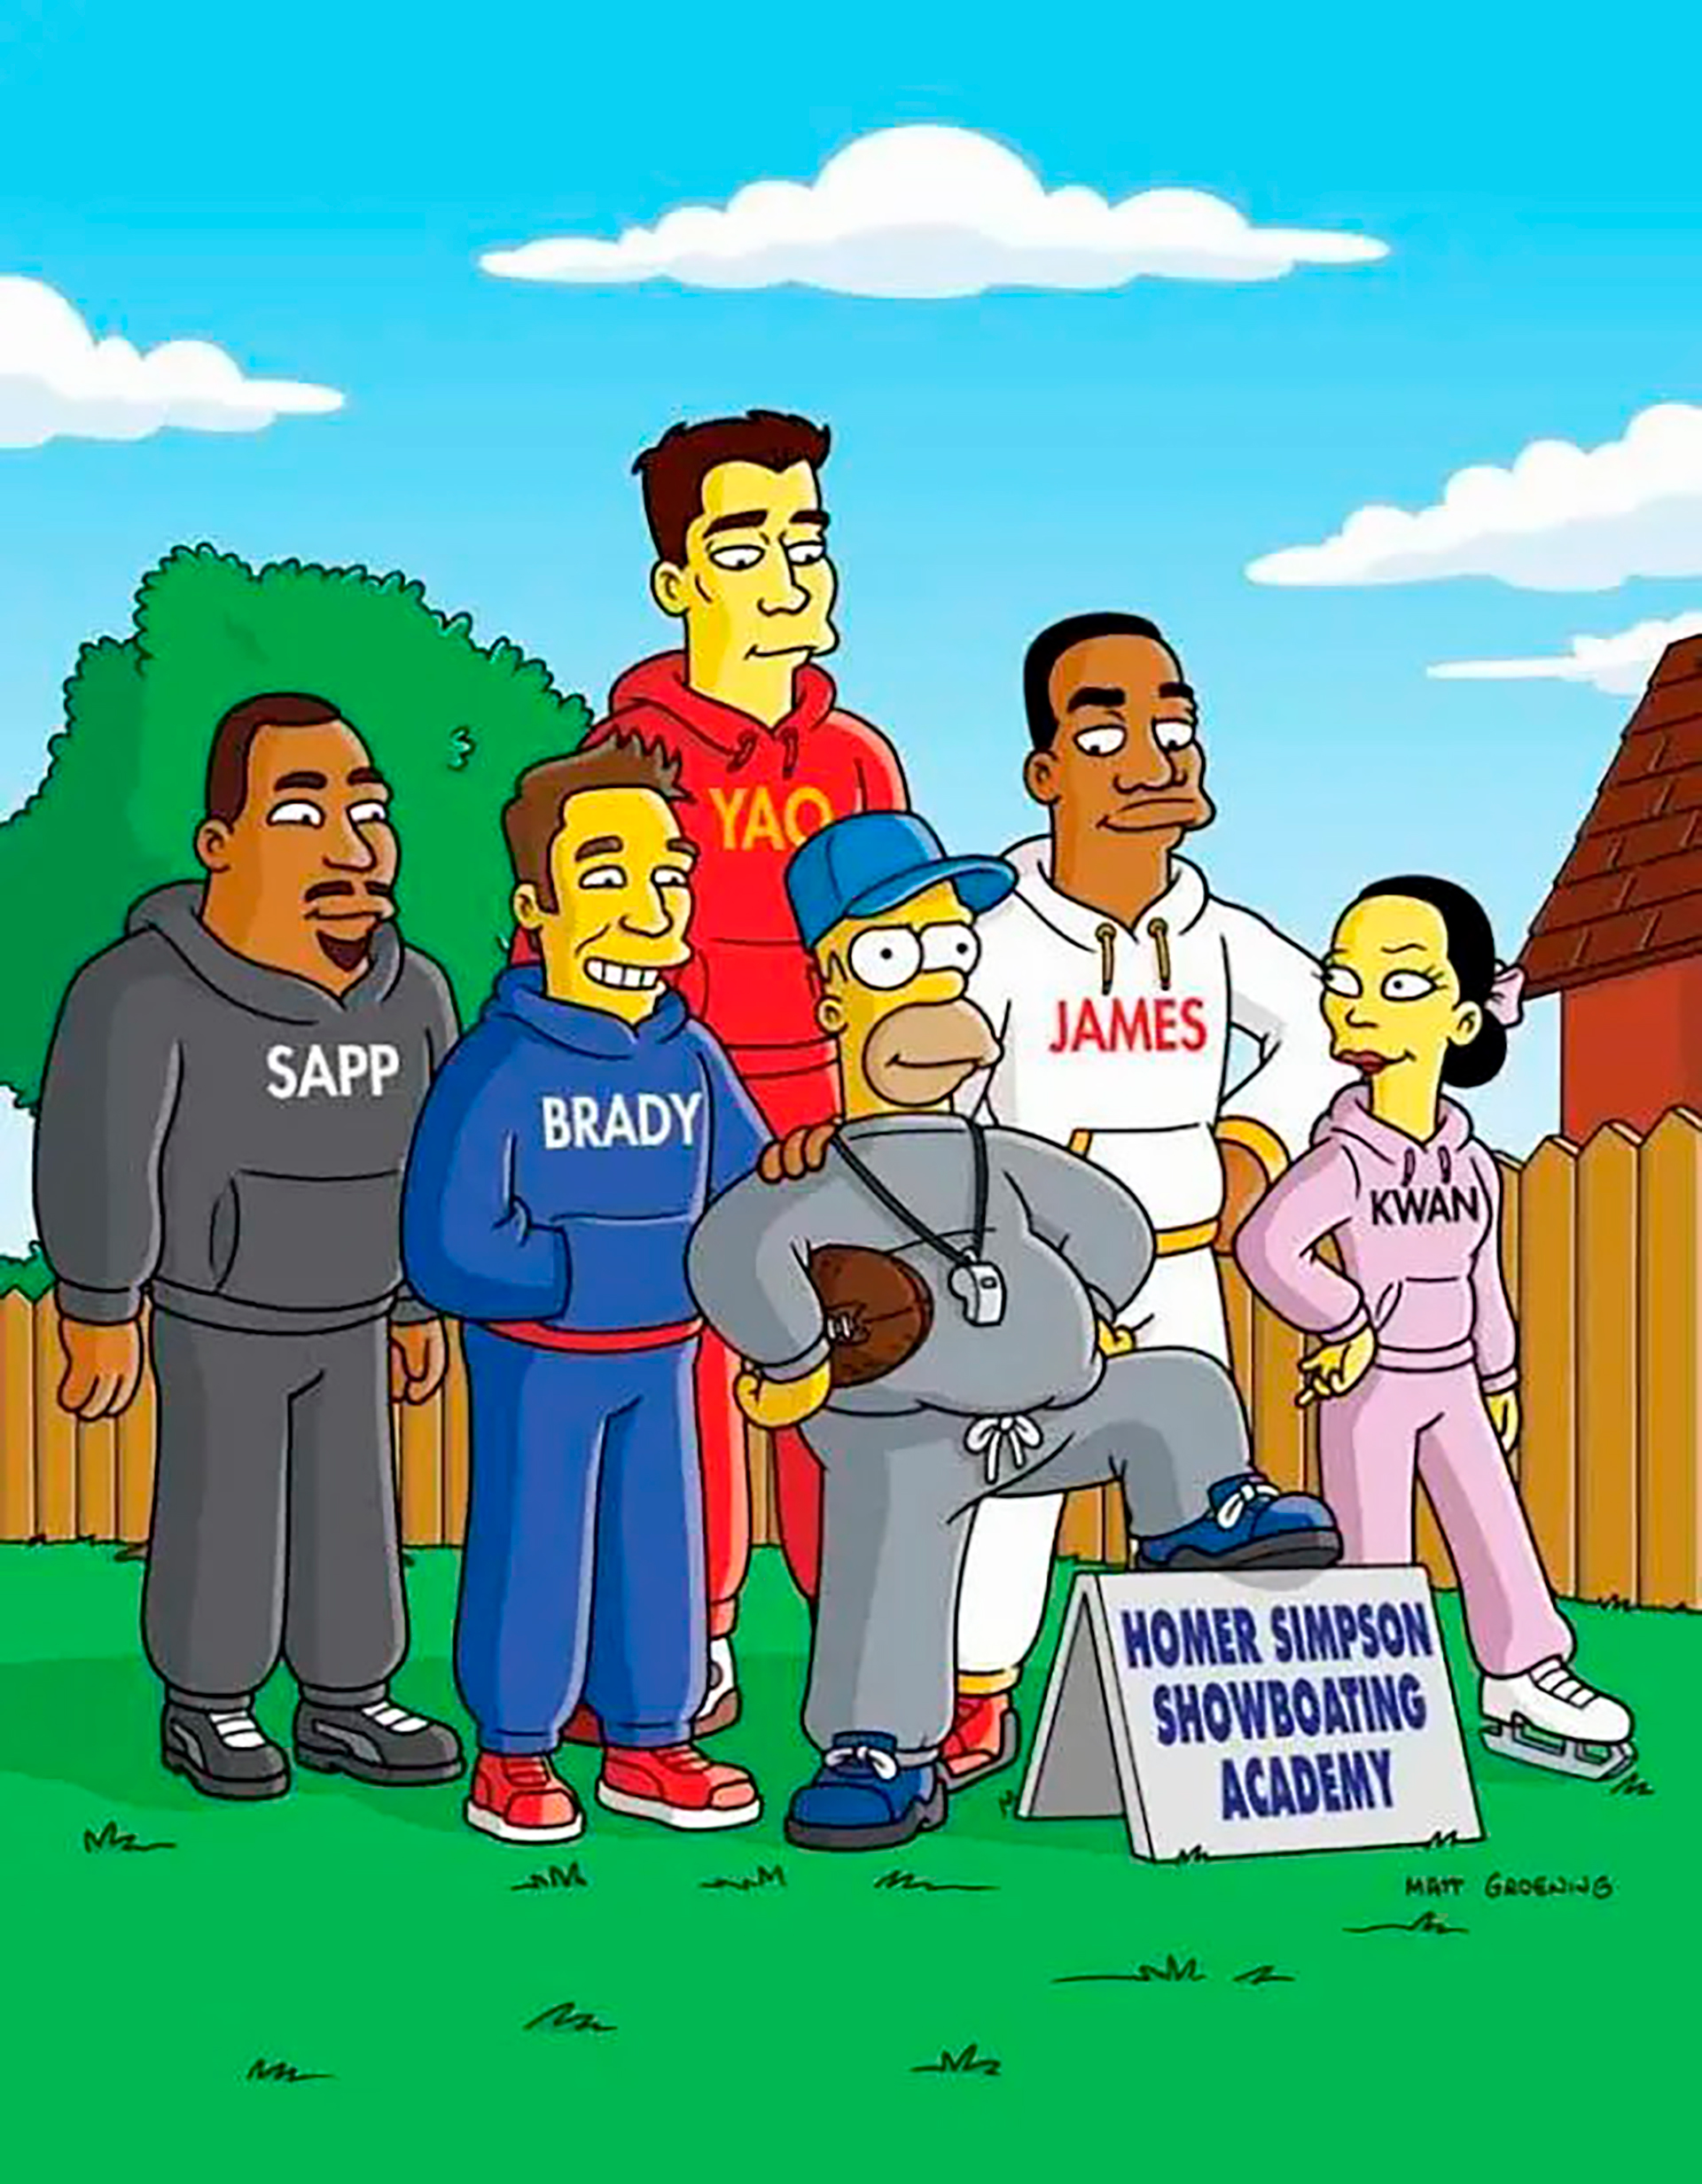 Warren Sapp, Tom Brady, Yao Ming, LeBron James and Michelle Kwan all appeared in The Simpsons